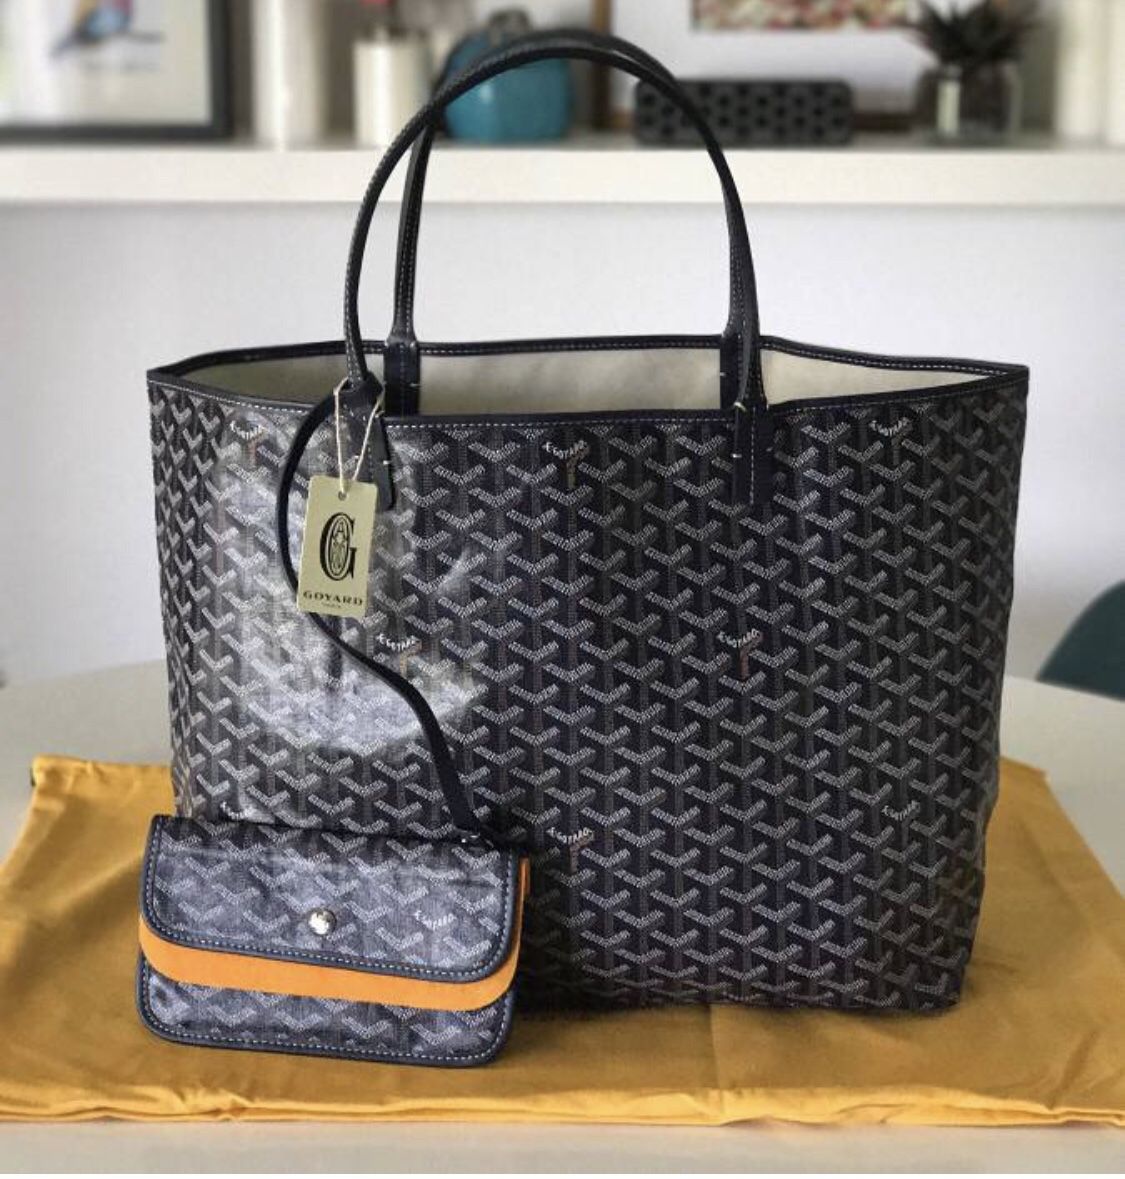 Pending% Authentic Goyard tote PM Size for Sale in San Mateo, CA - OfferUp